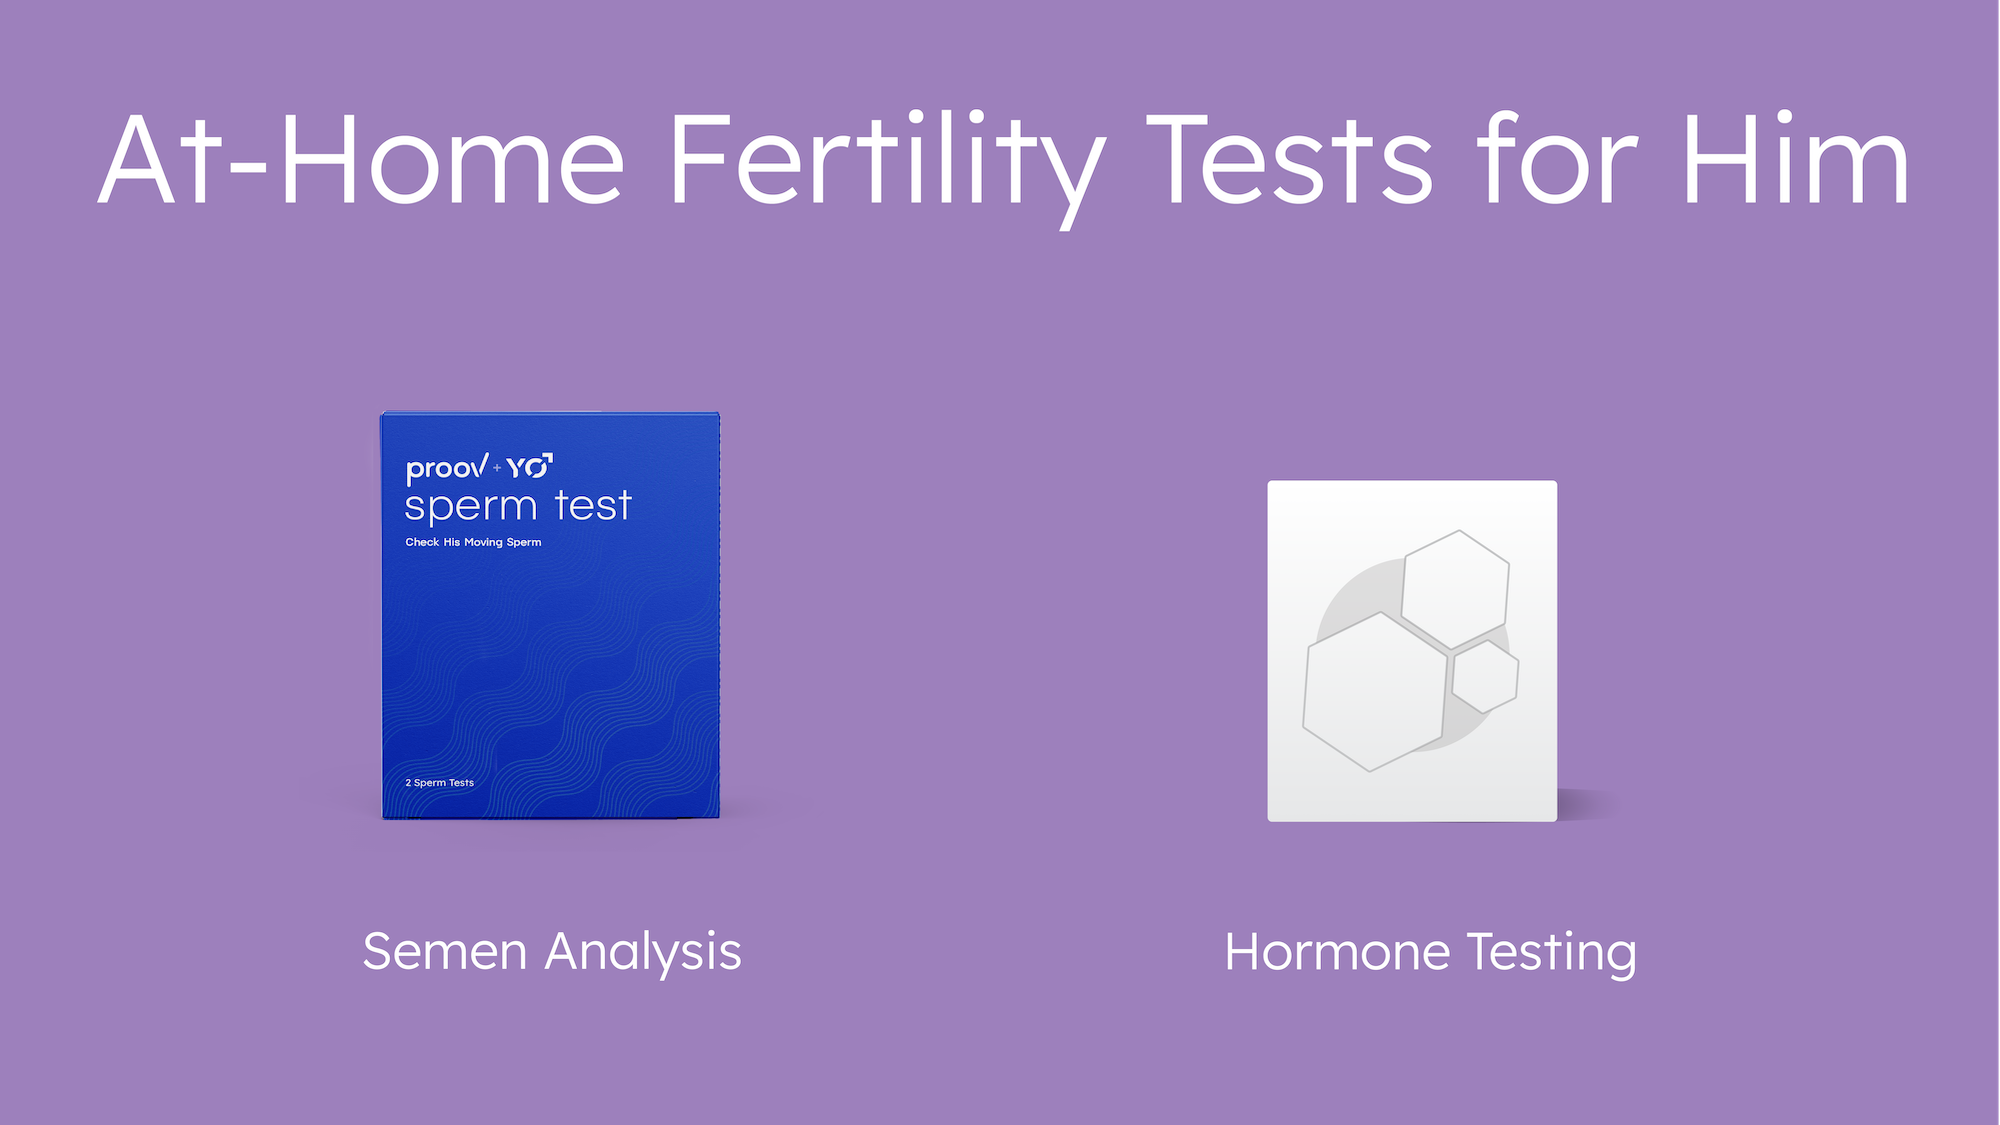 how accurate are at-home fertility tests?